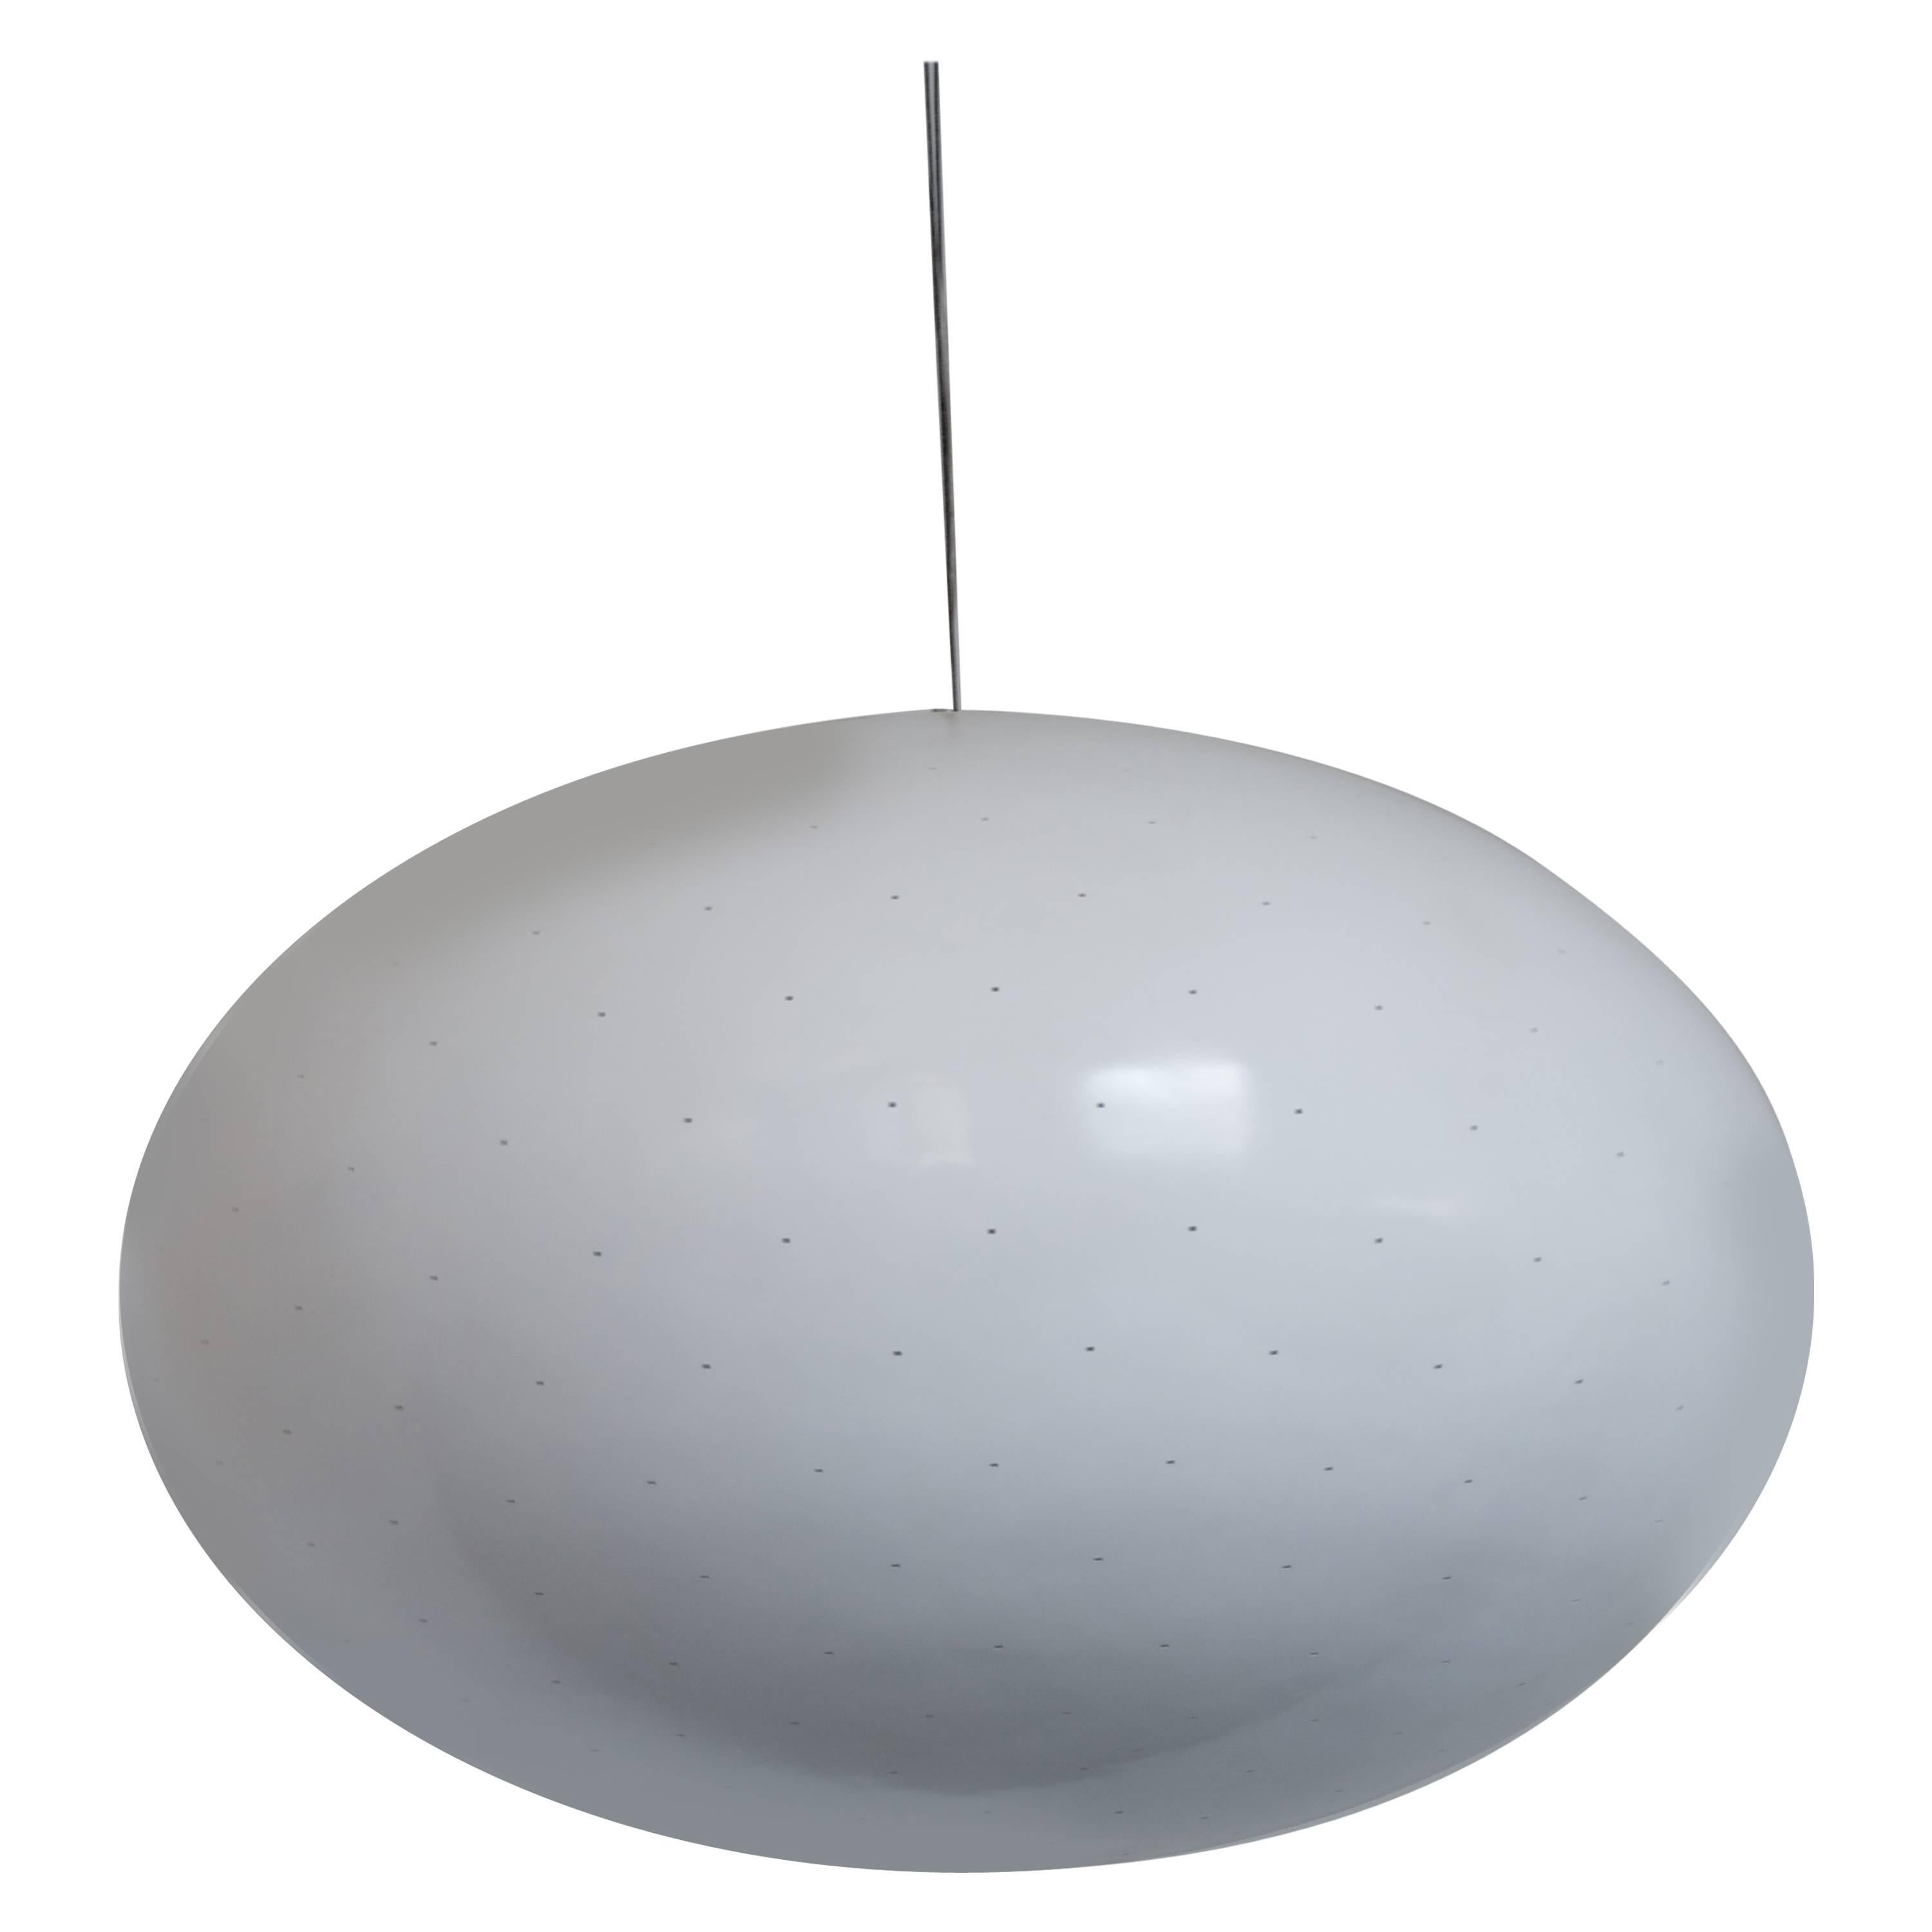 Ceiling Light Object "I.P.C.O." 2001 by Ron Arad For Sale